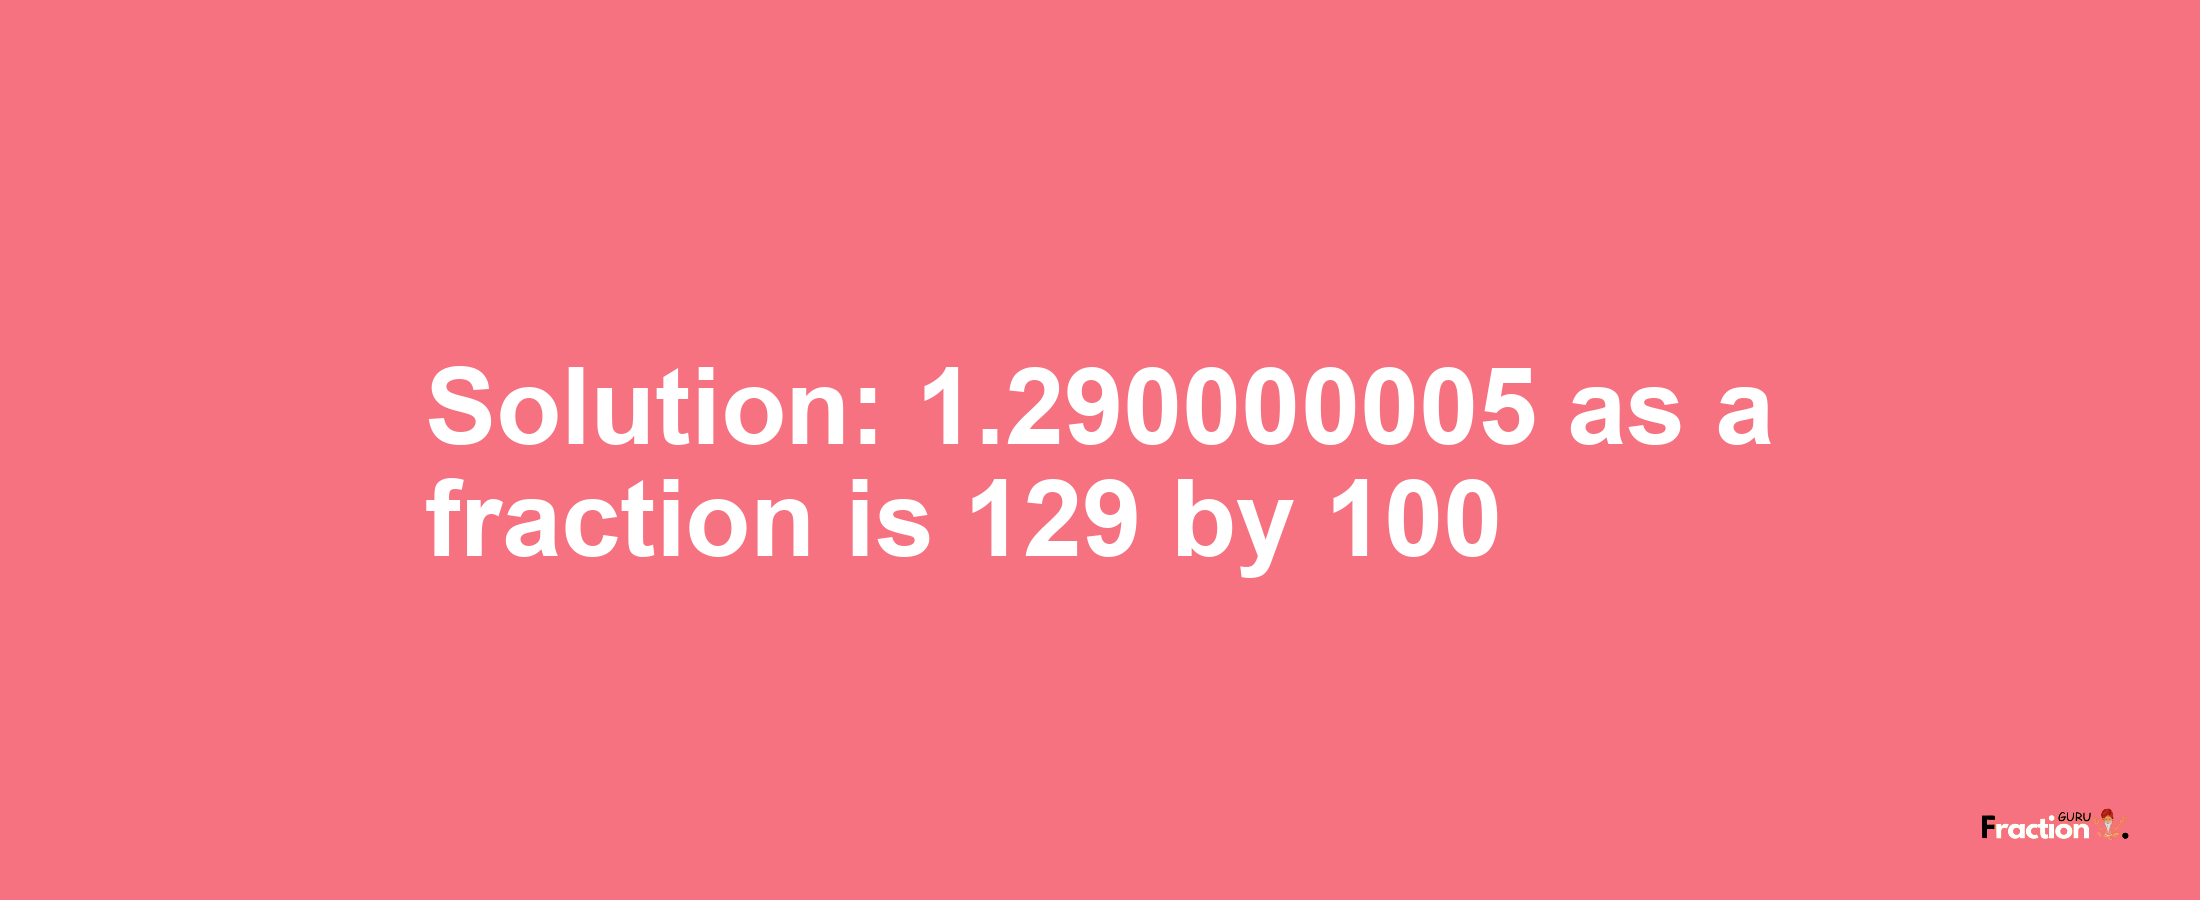 Solution:1.290000005 as a fraction is 129/100